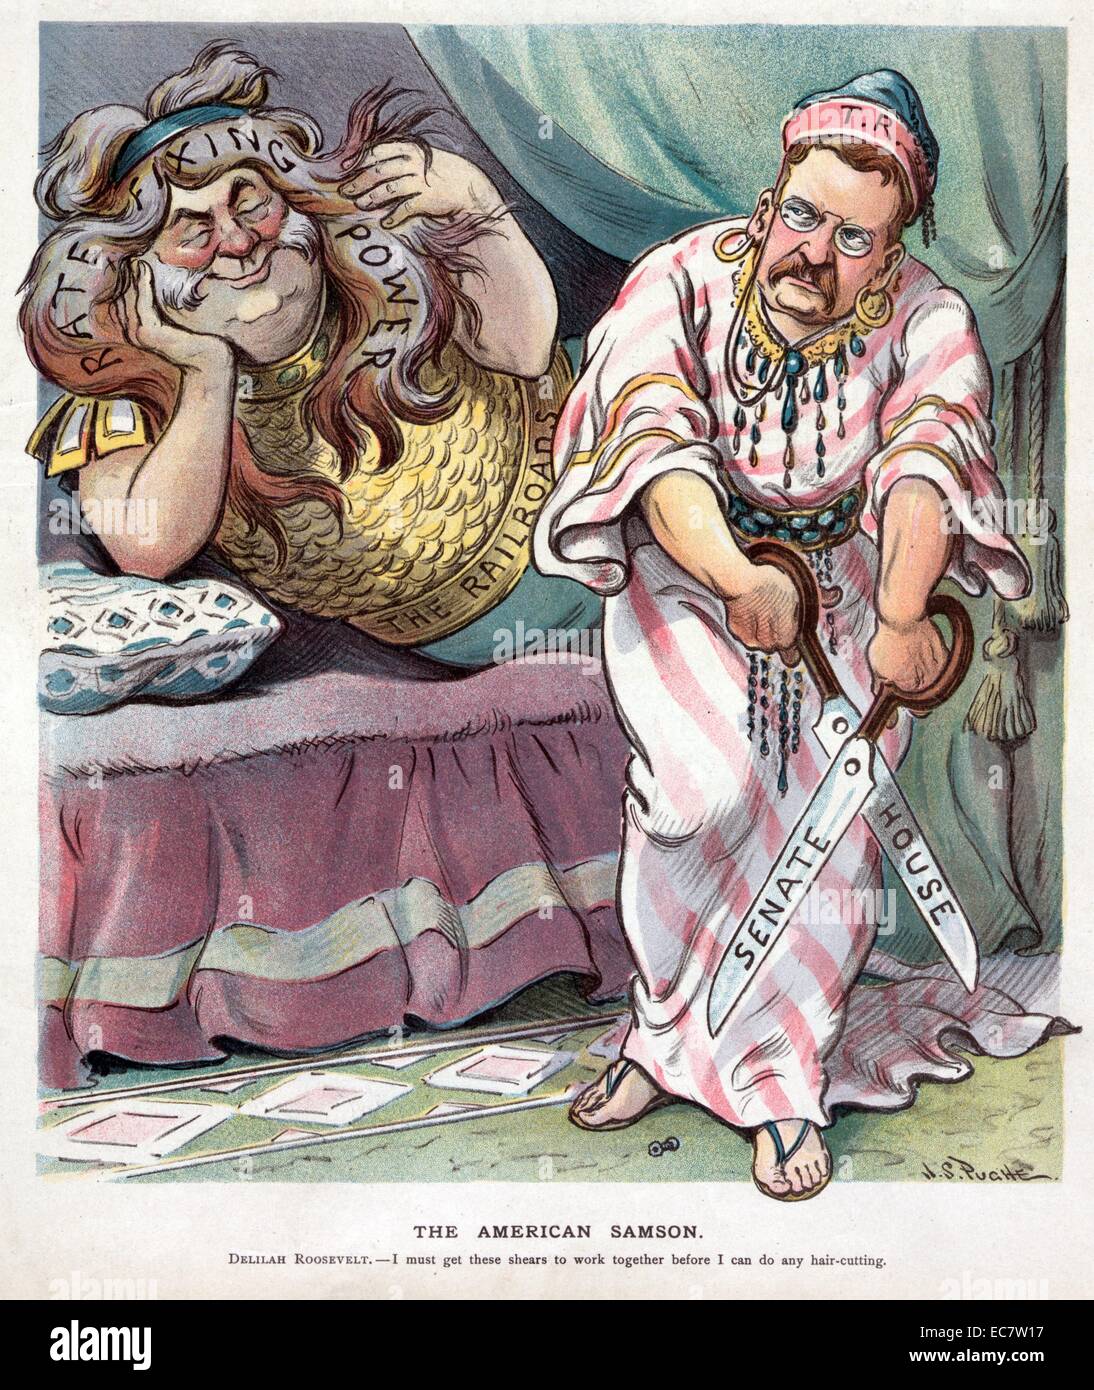 The American Samson ' Theodore Roosevelt as Delilah with a broken pair of shears, one side labelled 'Senate' and the other labelled 'House'; behind, reclining on a bed is 'Samson', a long-haired old man labelled 'The Railroads', his hair labelled 'Rate Fixing Power'; he appears to be asleep, having pleasant 'Rate Fixing' dreams, caressing his long locks with his left hand. Stock Photo